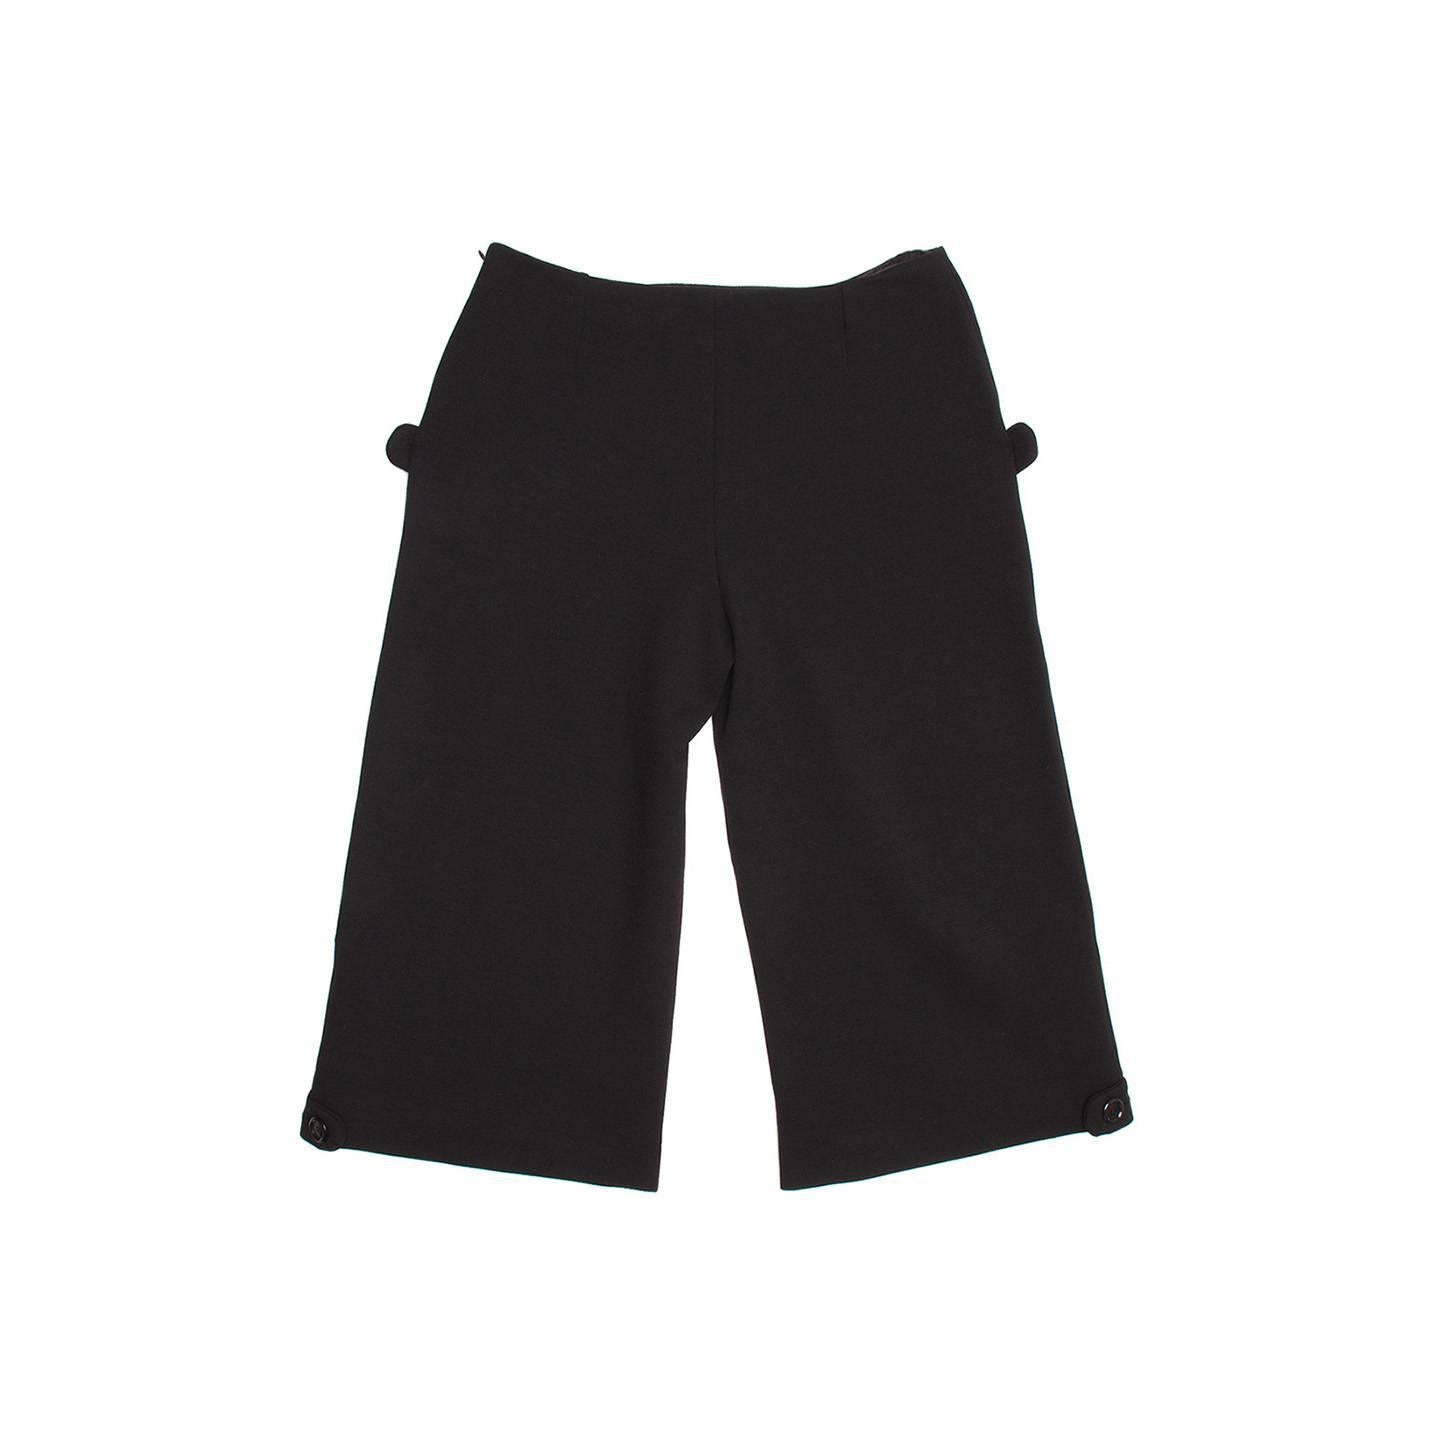 Marni Black Wool Sailor Culottes In New Condition For Sale In Brooklyn, NY